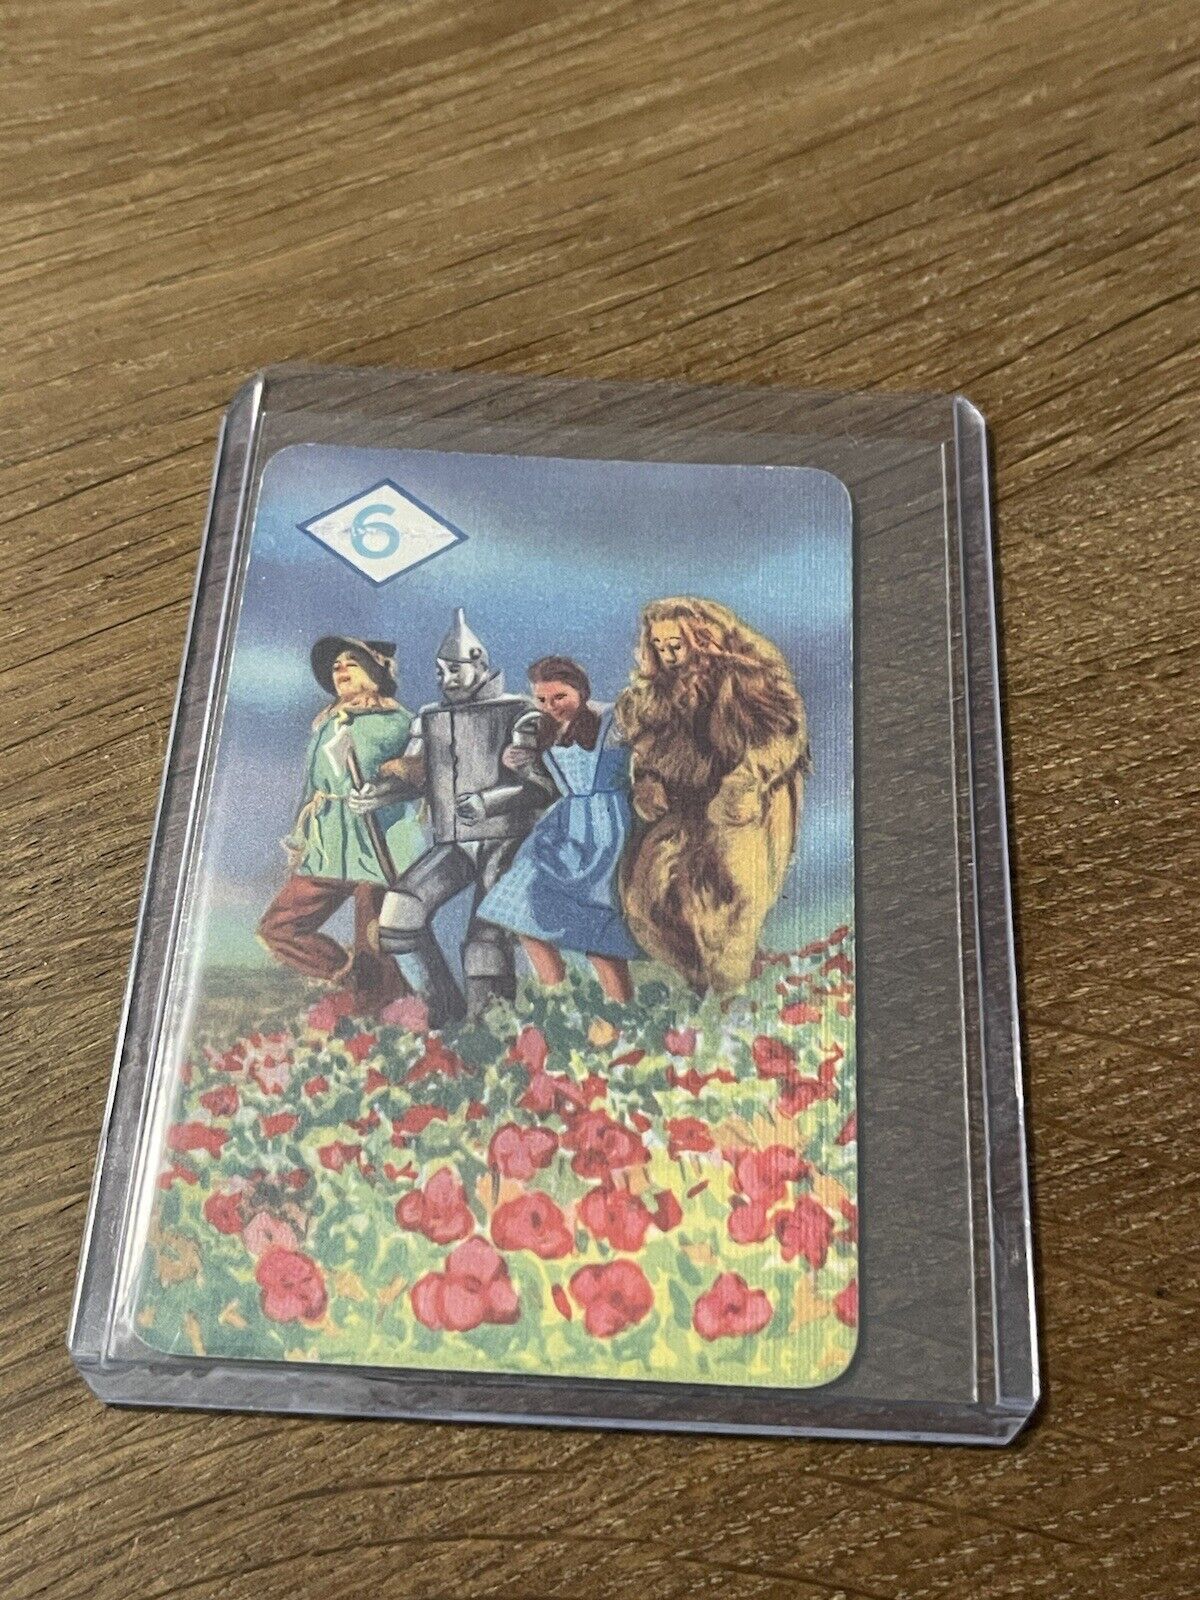 1940 Castell Bros. Ltd. Wizard Of Oz Card Game VINTAGE / ANTIQUE Playing Card